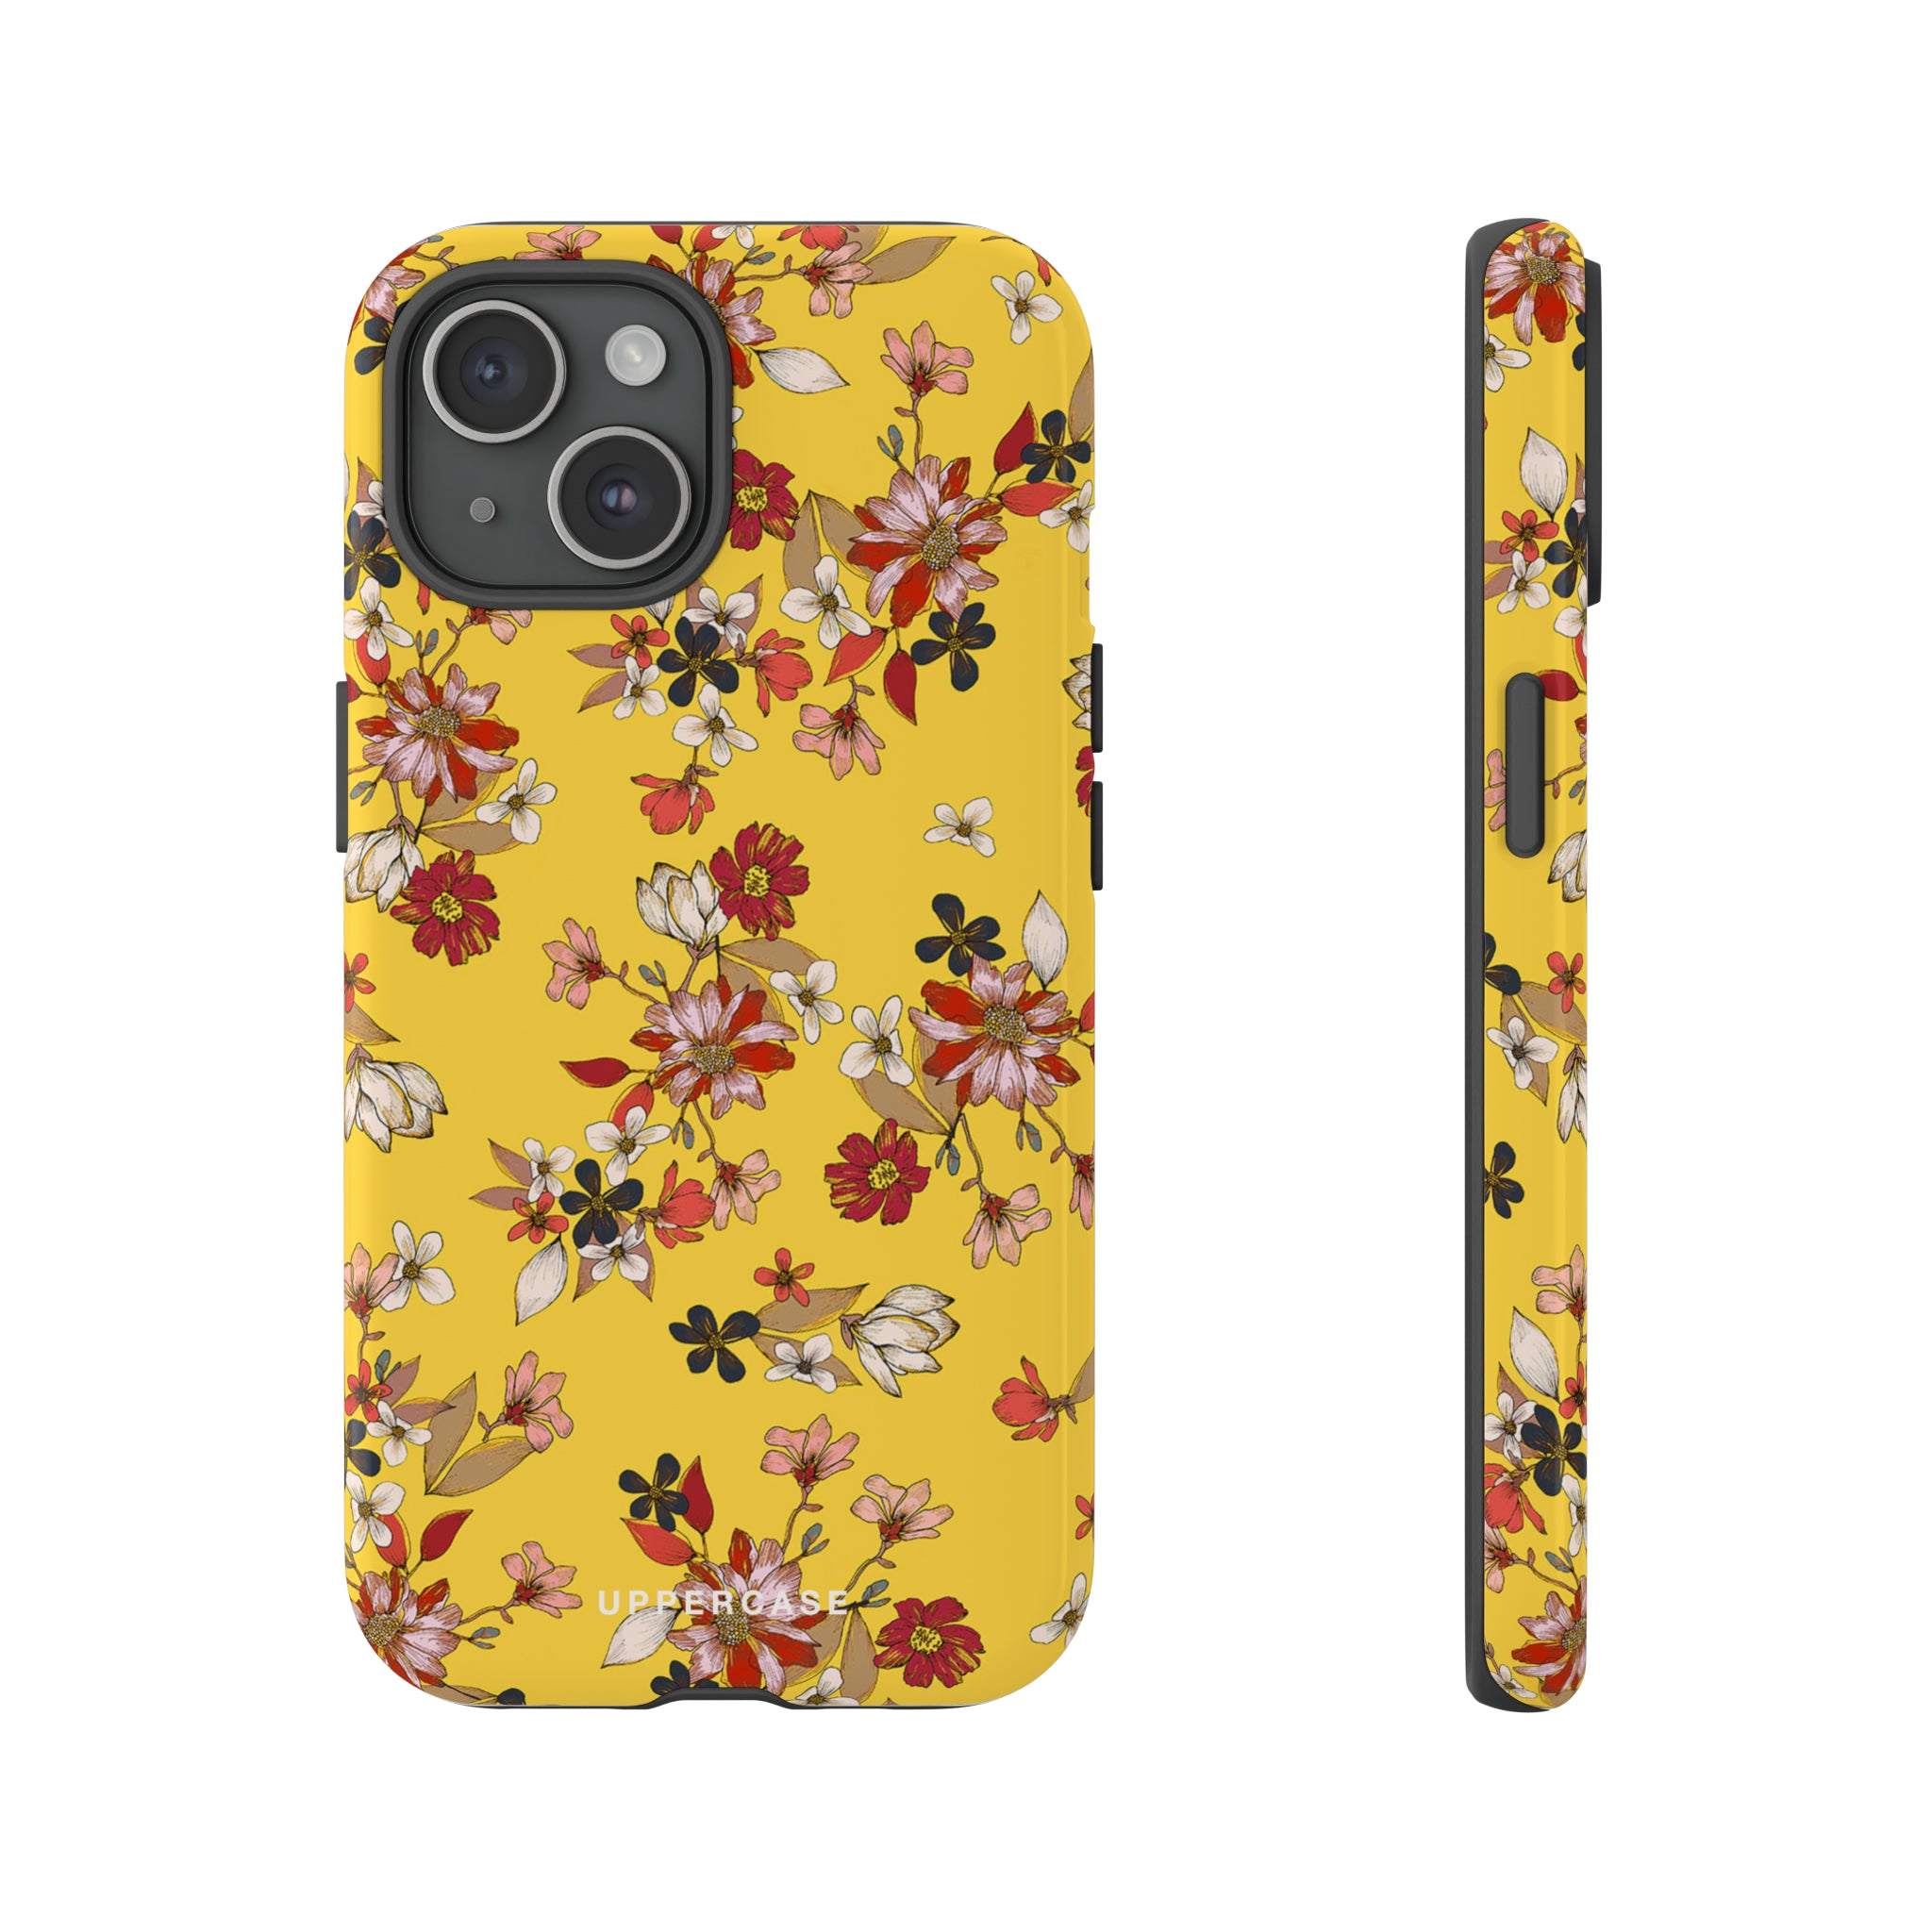 Daylight Floral - Strong Case